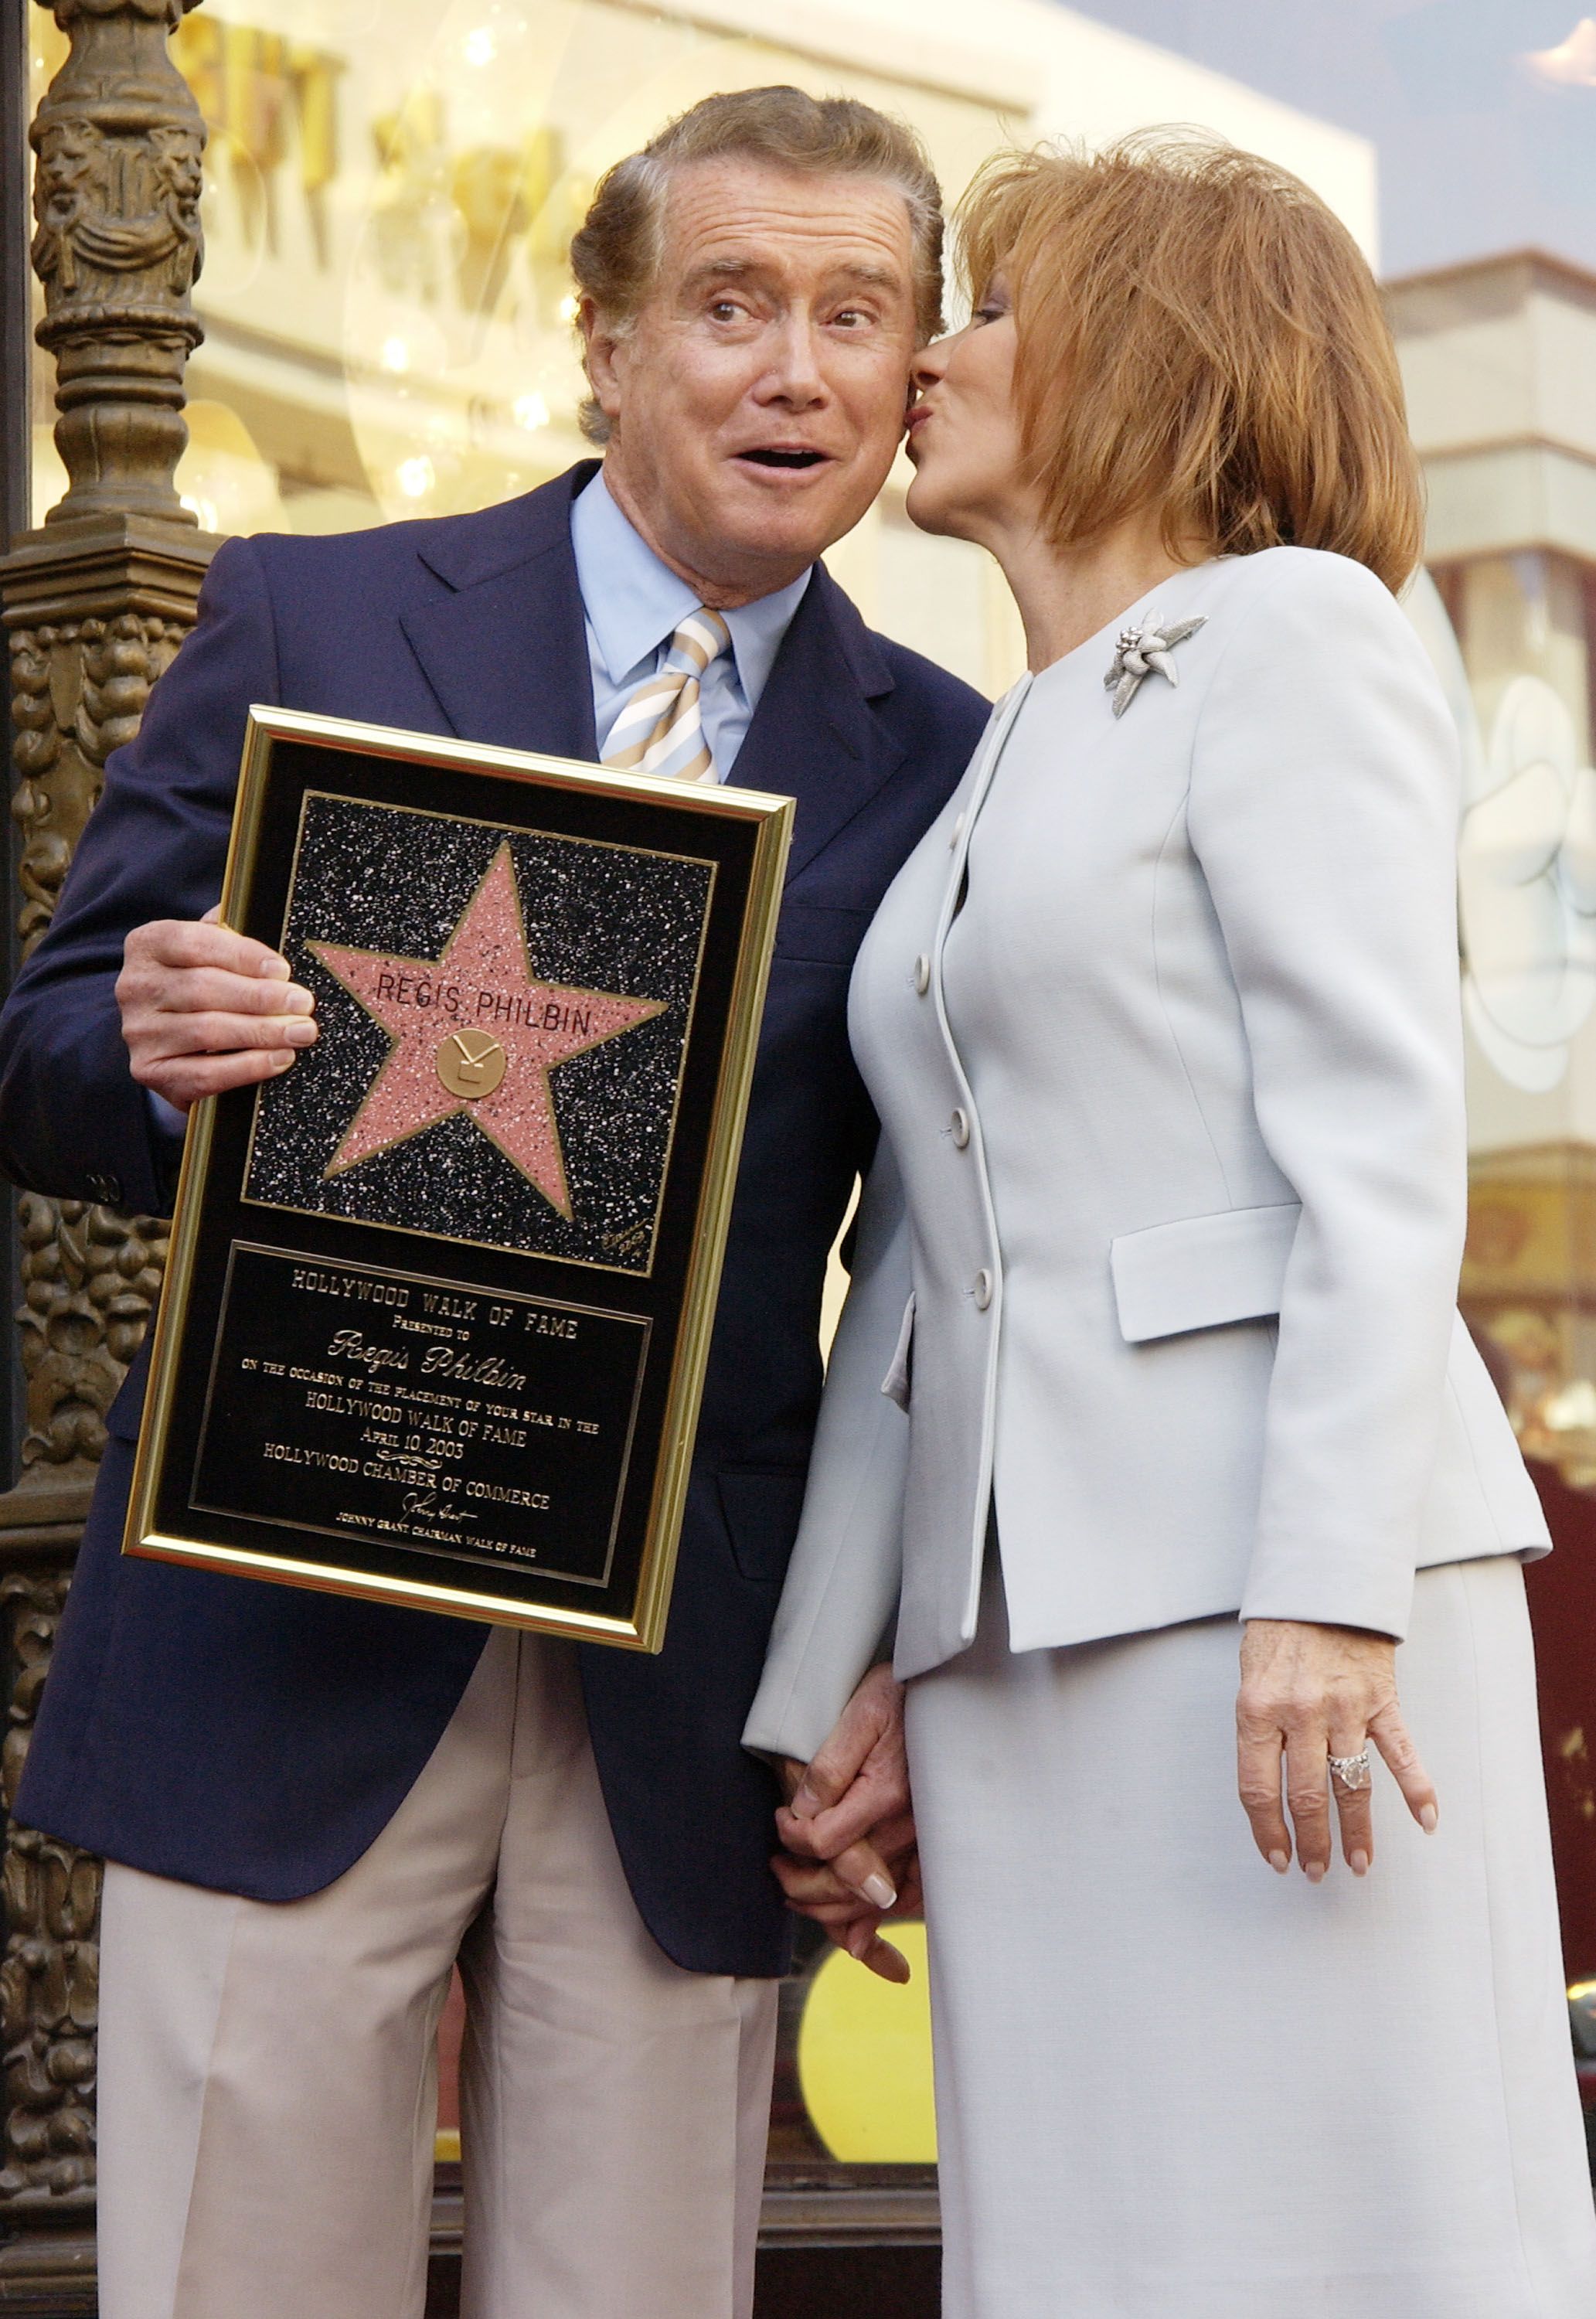 Regis and Joy Philbin after he received a Star on the Hollywood Walk of Fame on April 10, 2003, in Hollywood, California. | Source: Robert Mora/Getty Images